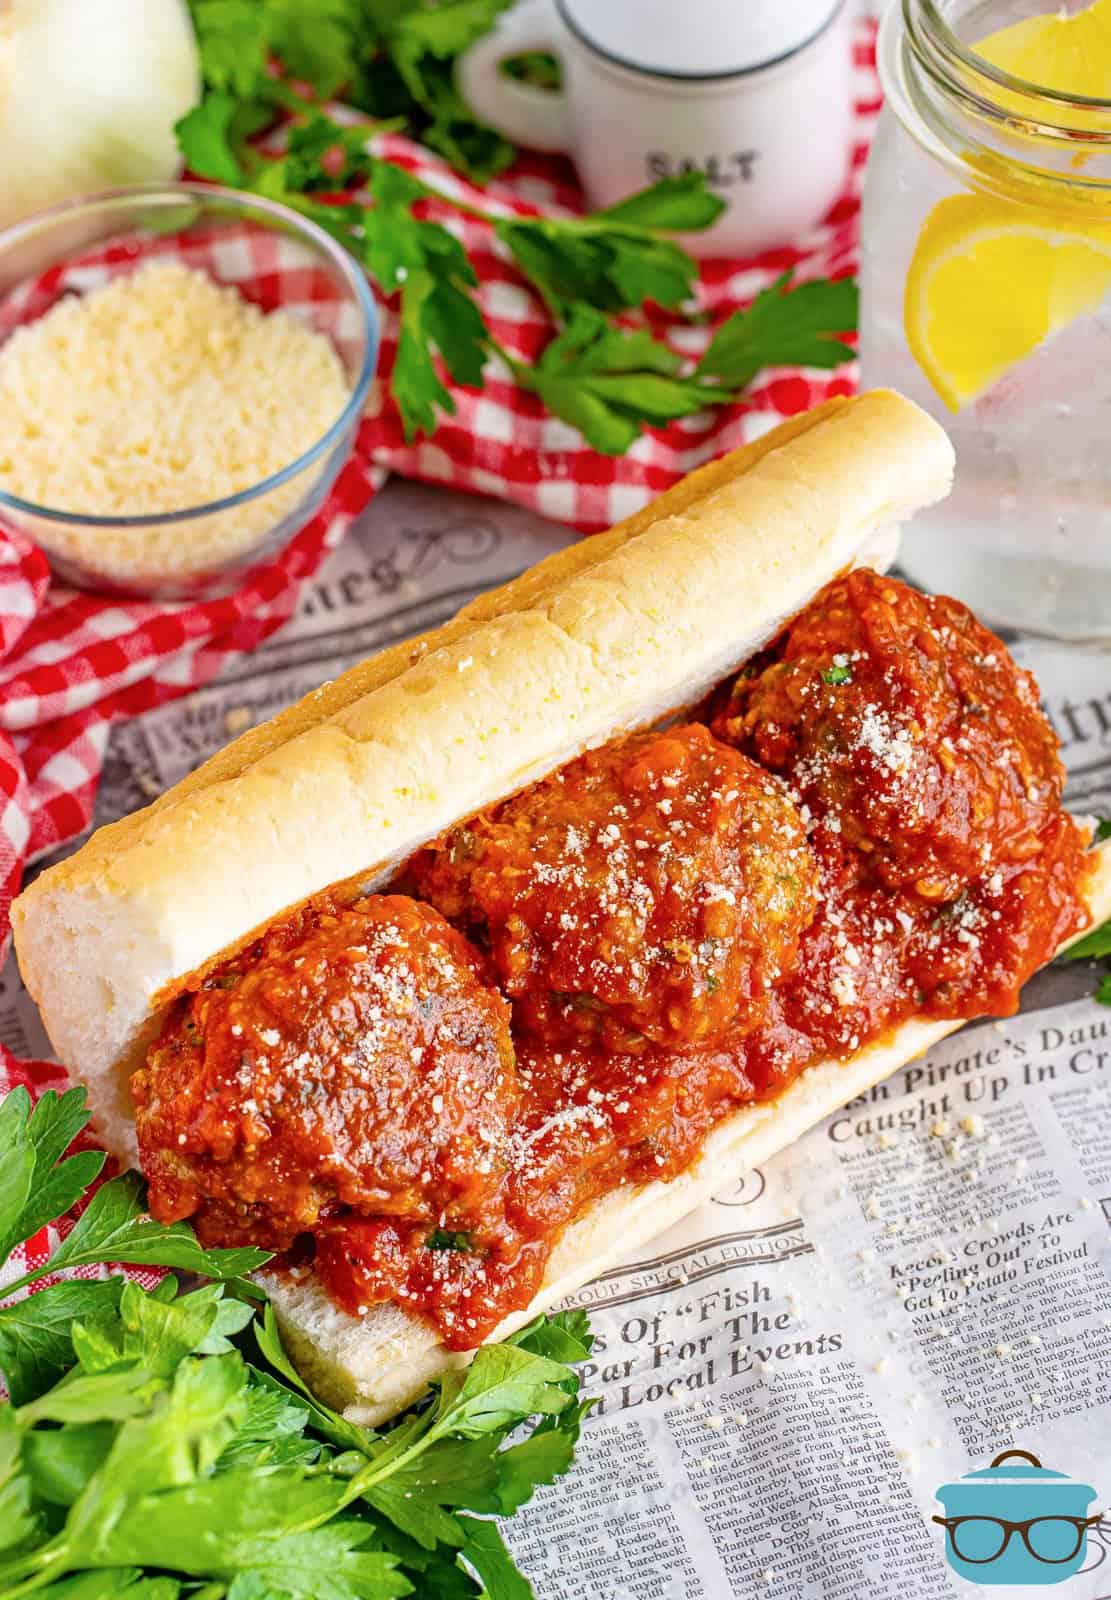 A sub roll with three large Homemade Meatballs and sauce.